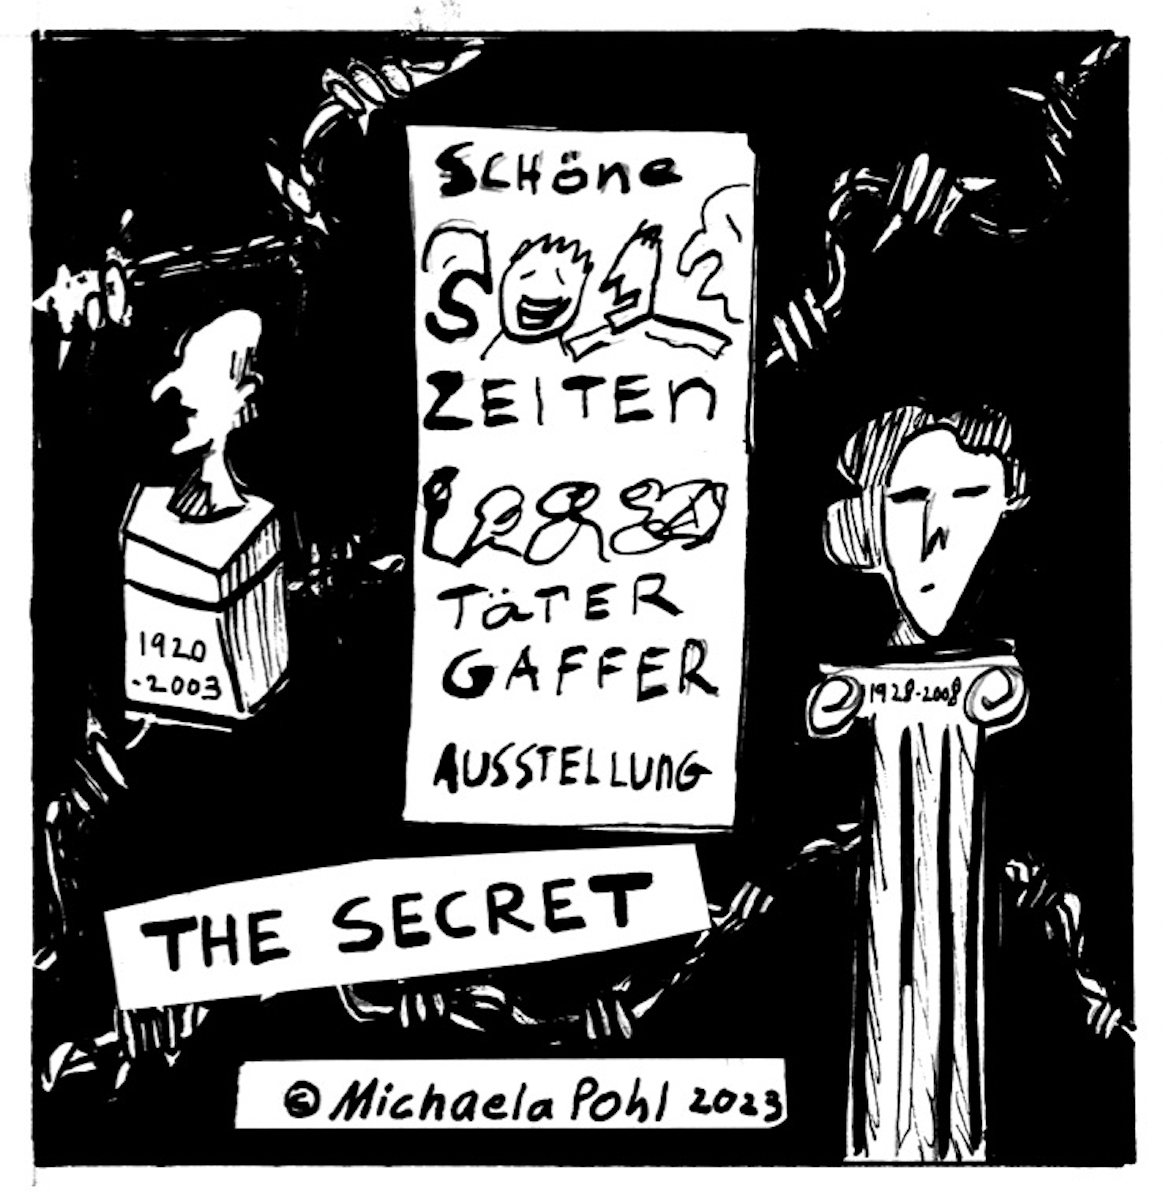 “The Secret © Michaela Pohl 2023”
A poster reads “Schöne Zeiten Täter Gaffer Austellung” next to two bust statues, one with years 1920-2003, the other 1928-2008